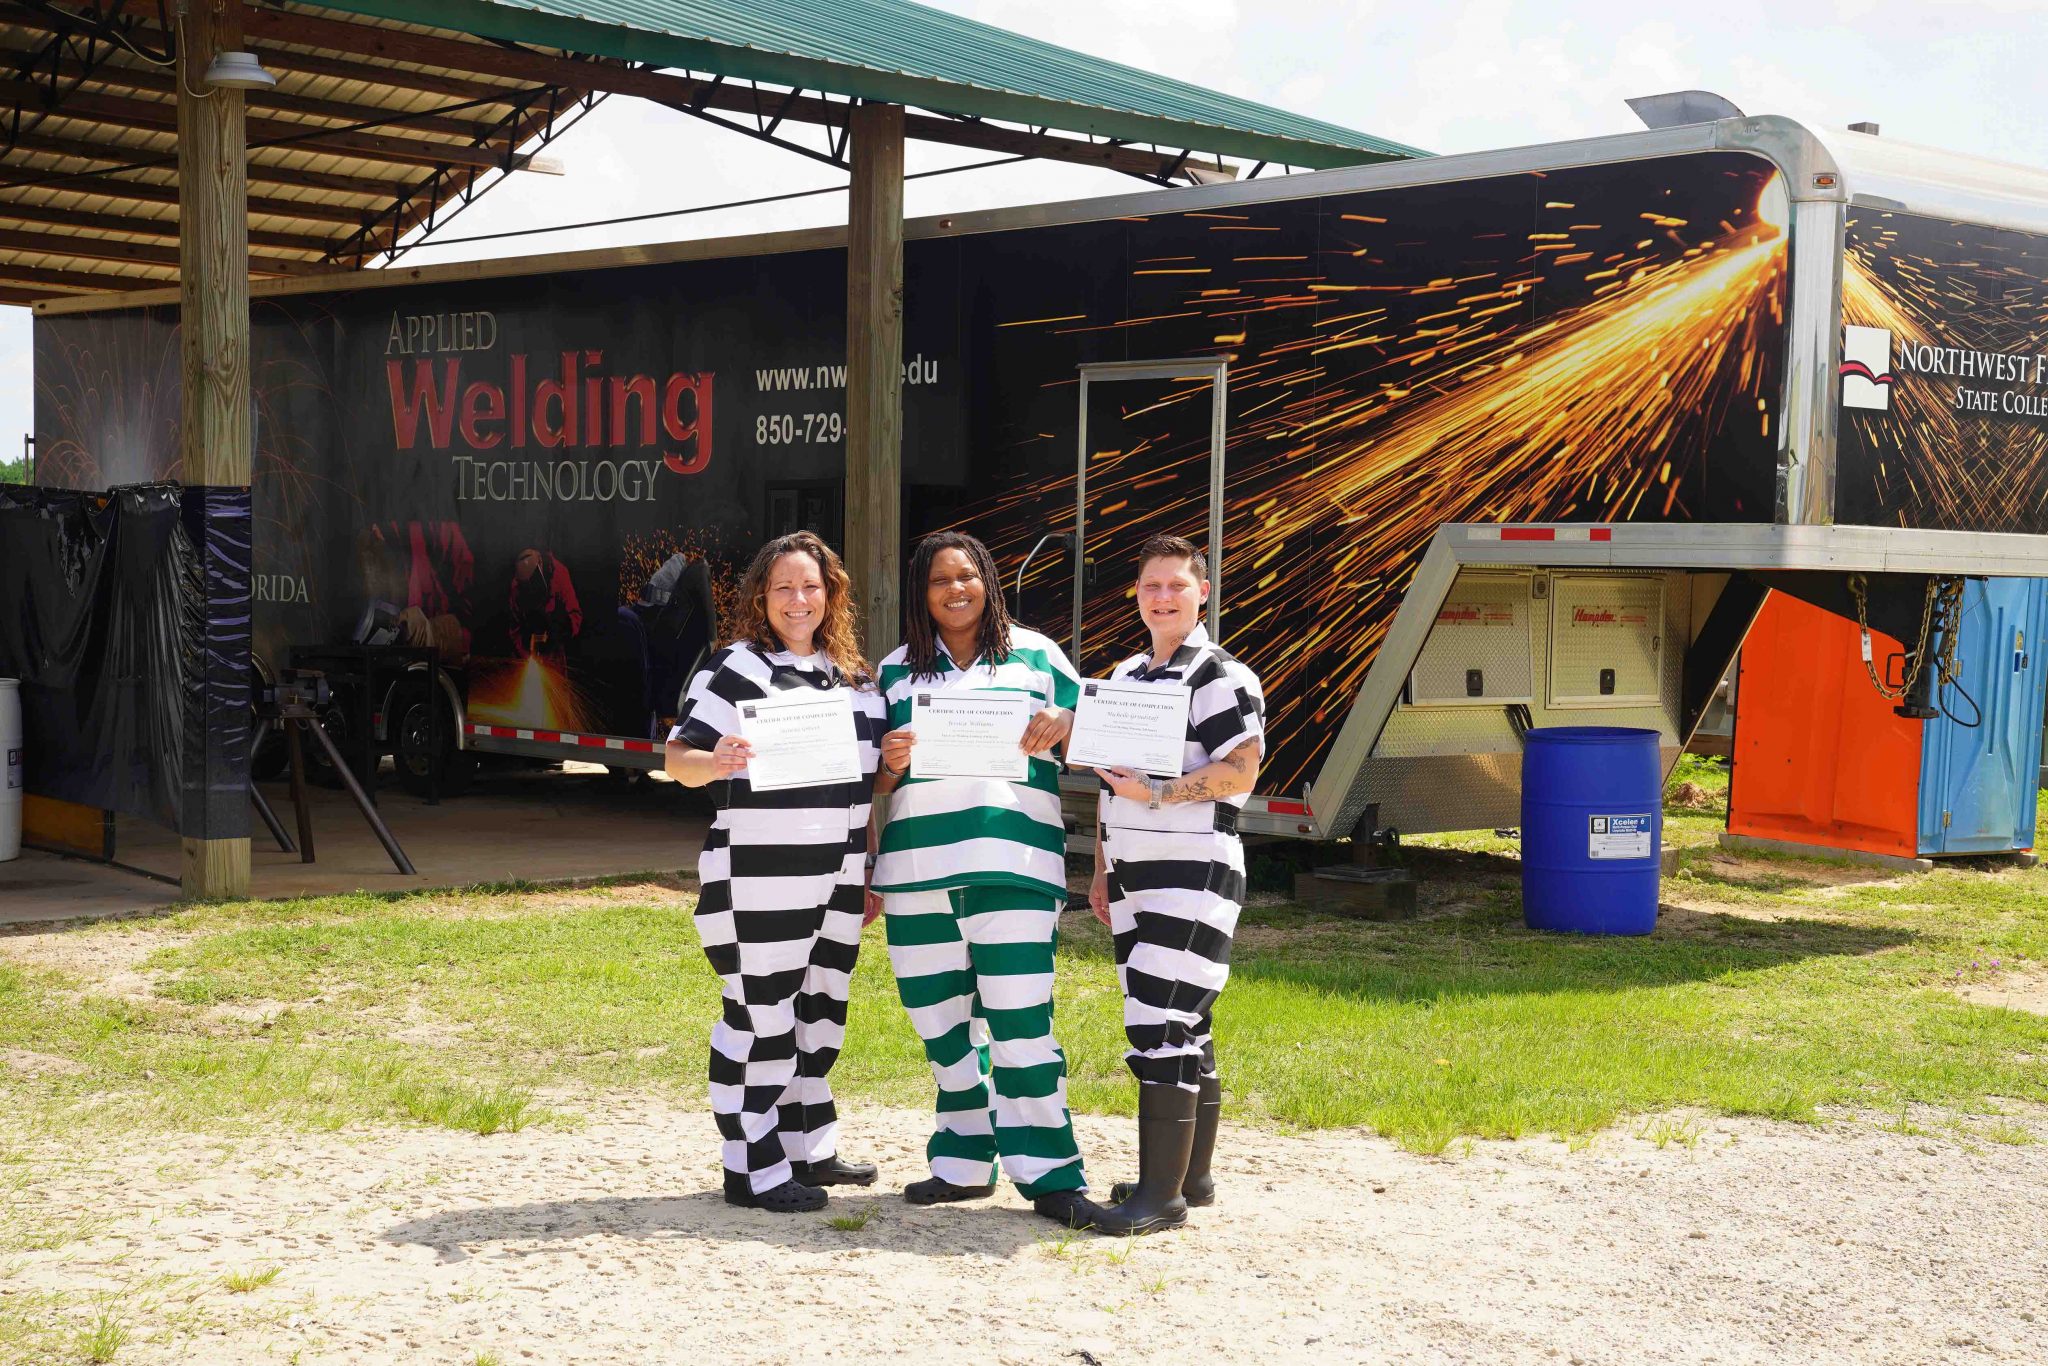 From left to right; Shauna Gilbert, Jessica Williams and Michele Grindstaff represent the first all-female graduates of the inmate welding credential program partnership bewteen Northwest Florida State College and Walton County Sheriff's Office.